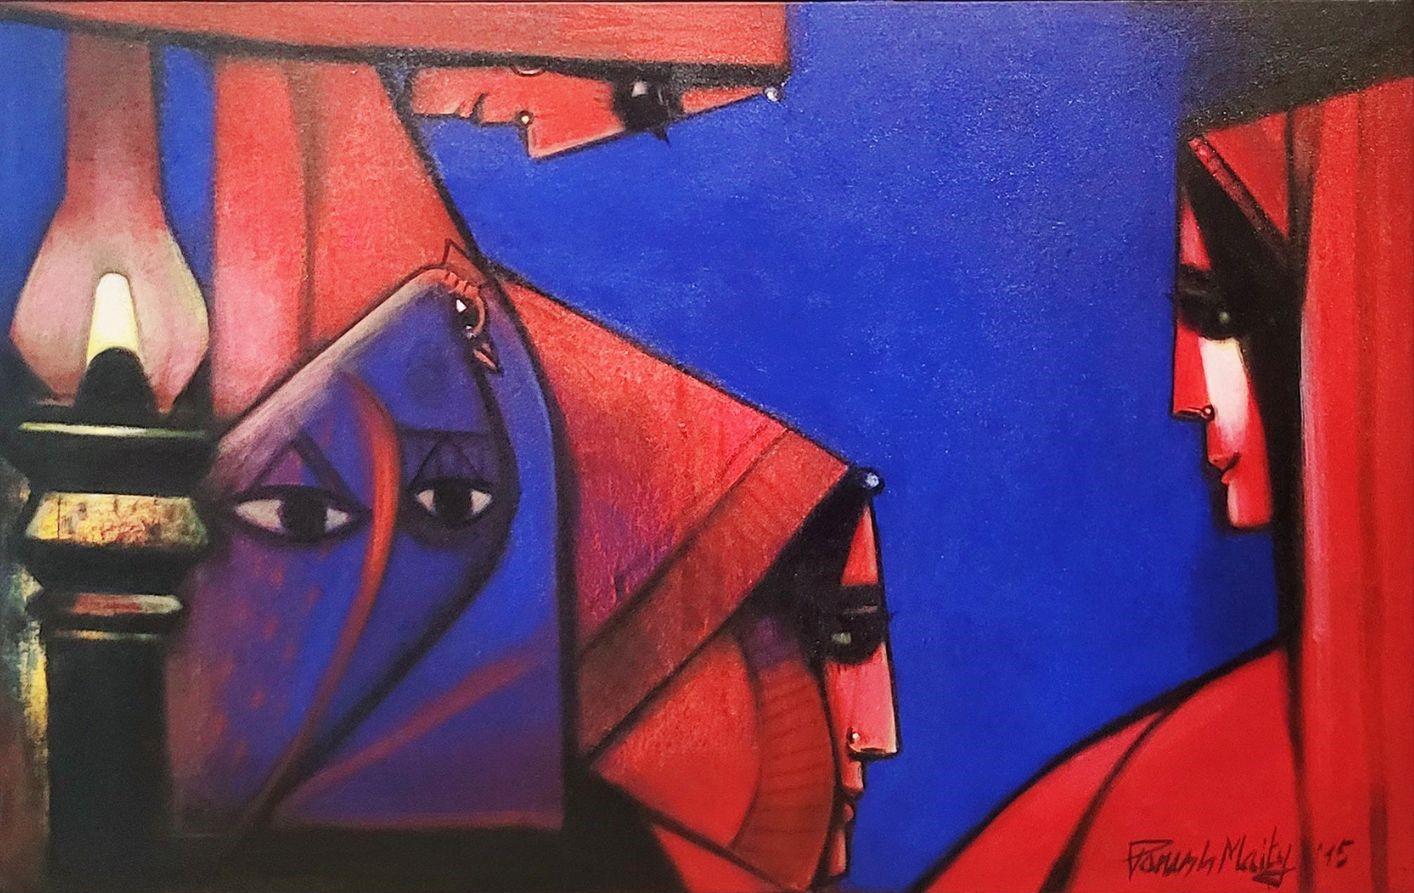 Paresh Maity - Eternal Triangle
30 x 48 inches ( Unremed Size ) 
58.1 x 40.1 Inches (  Framed Size )
Oil on canvas
2015

Paresh Maity is one of India's most lauded contemporary artist .His works are in various private collections as well as that of